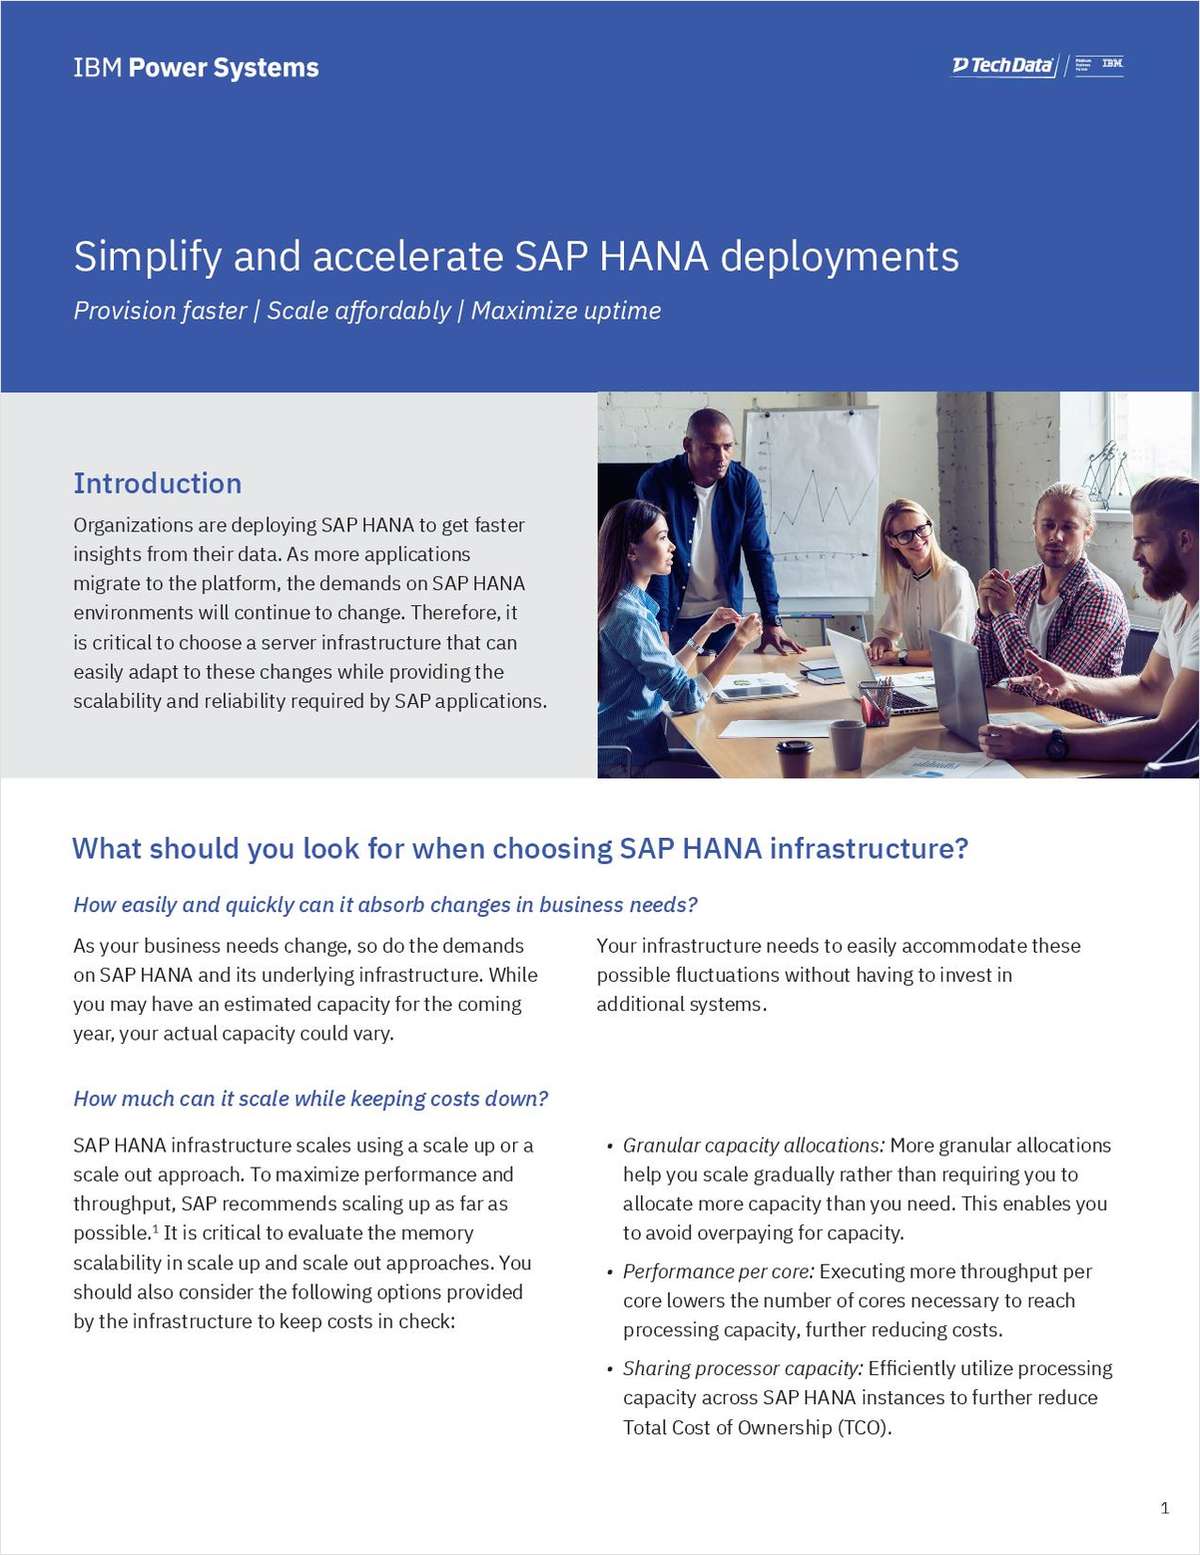 Simplify and accelerate SAP HANA deployments